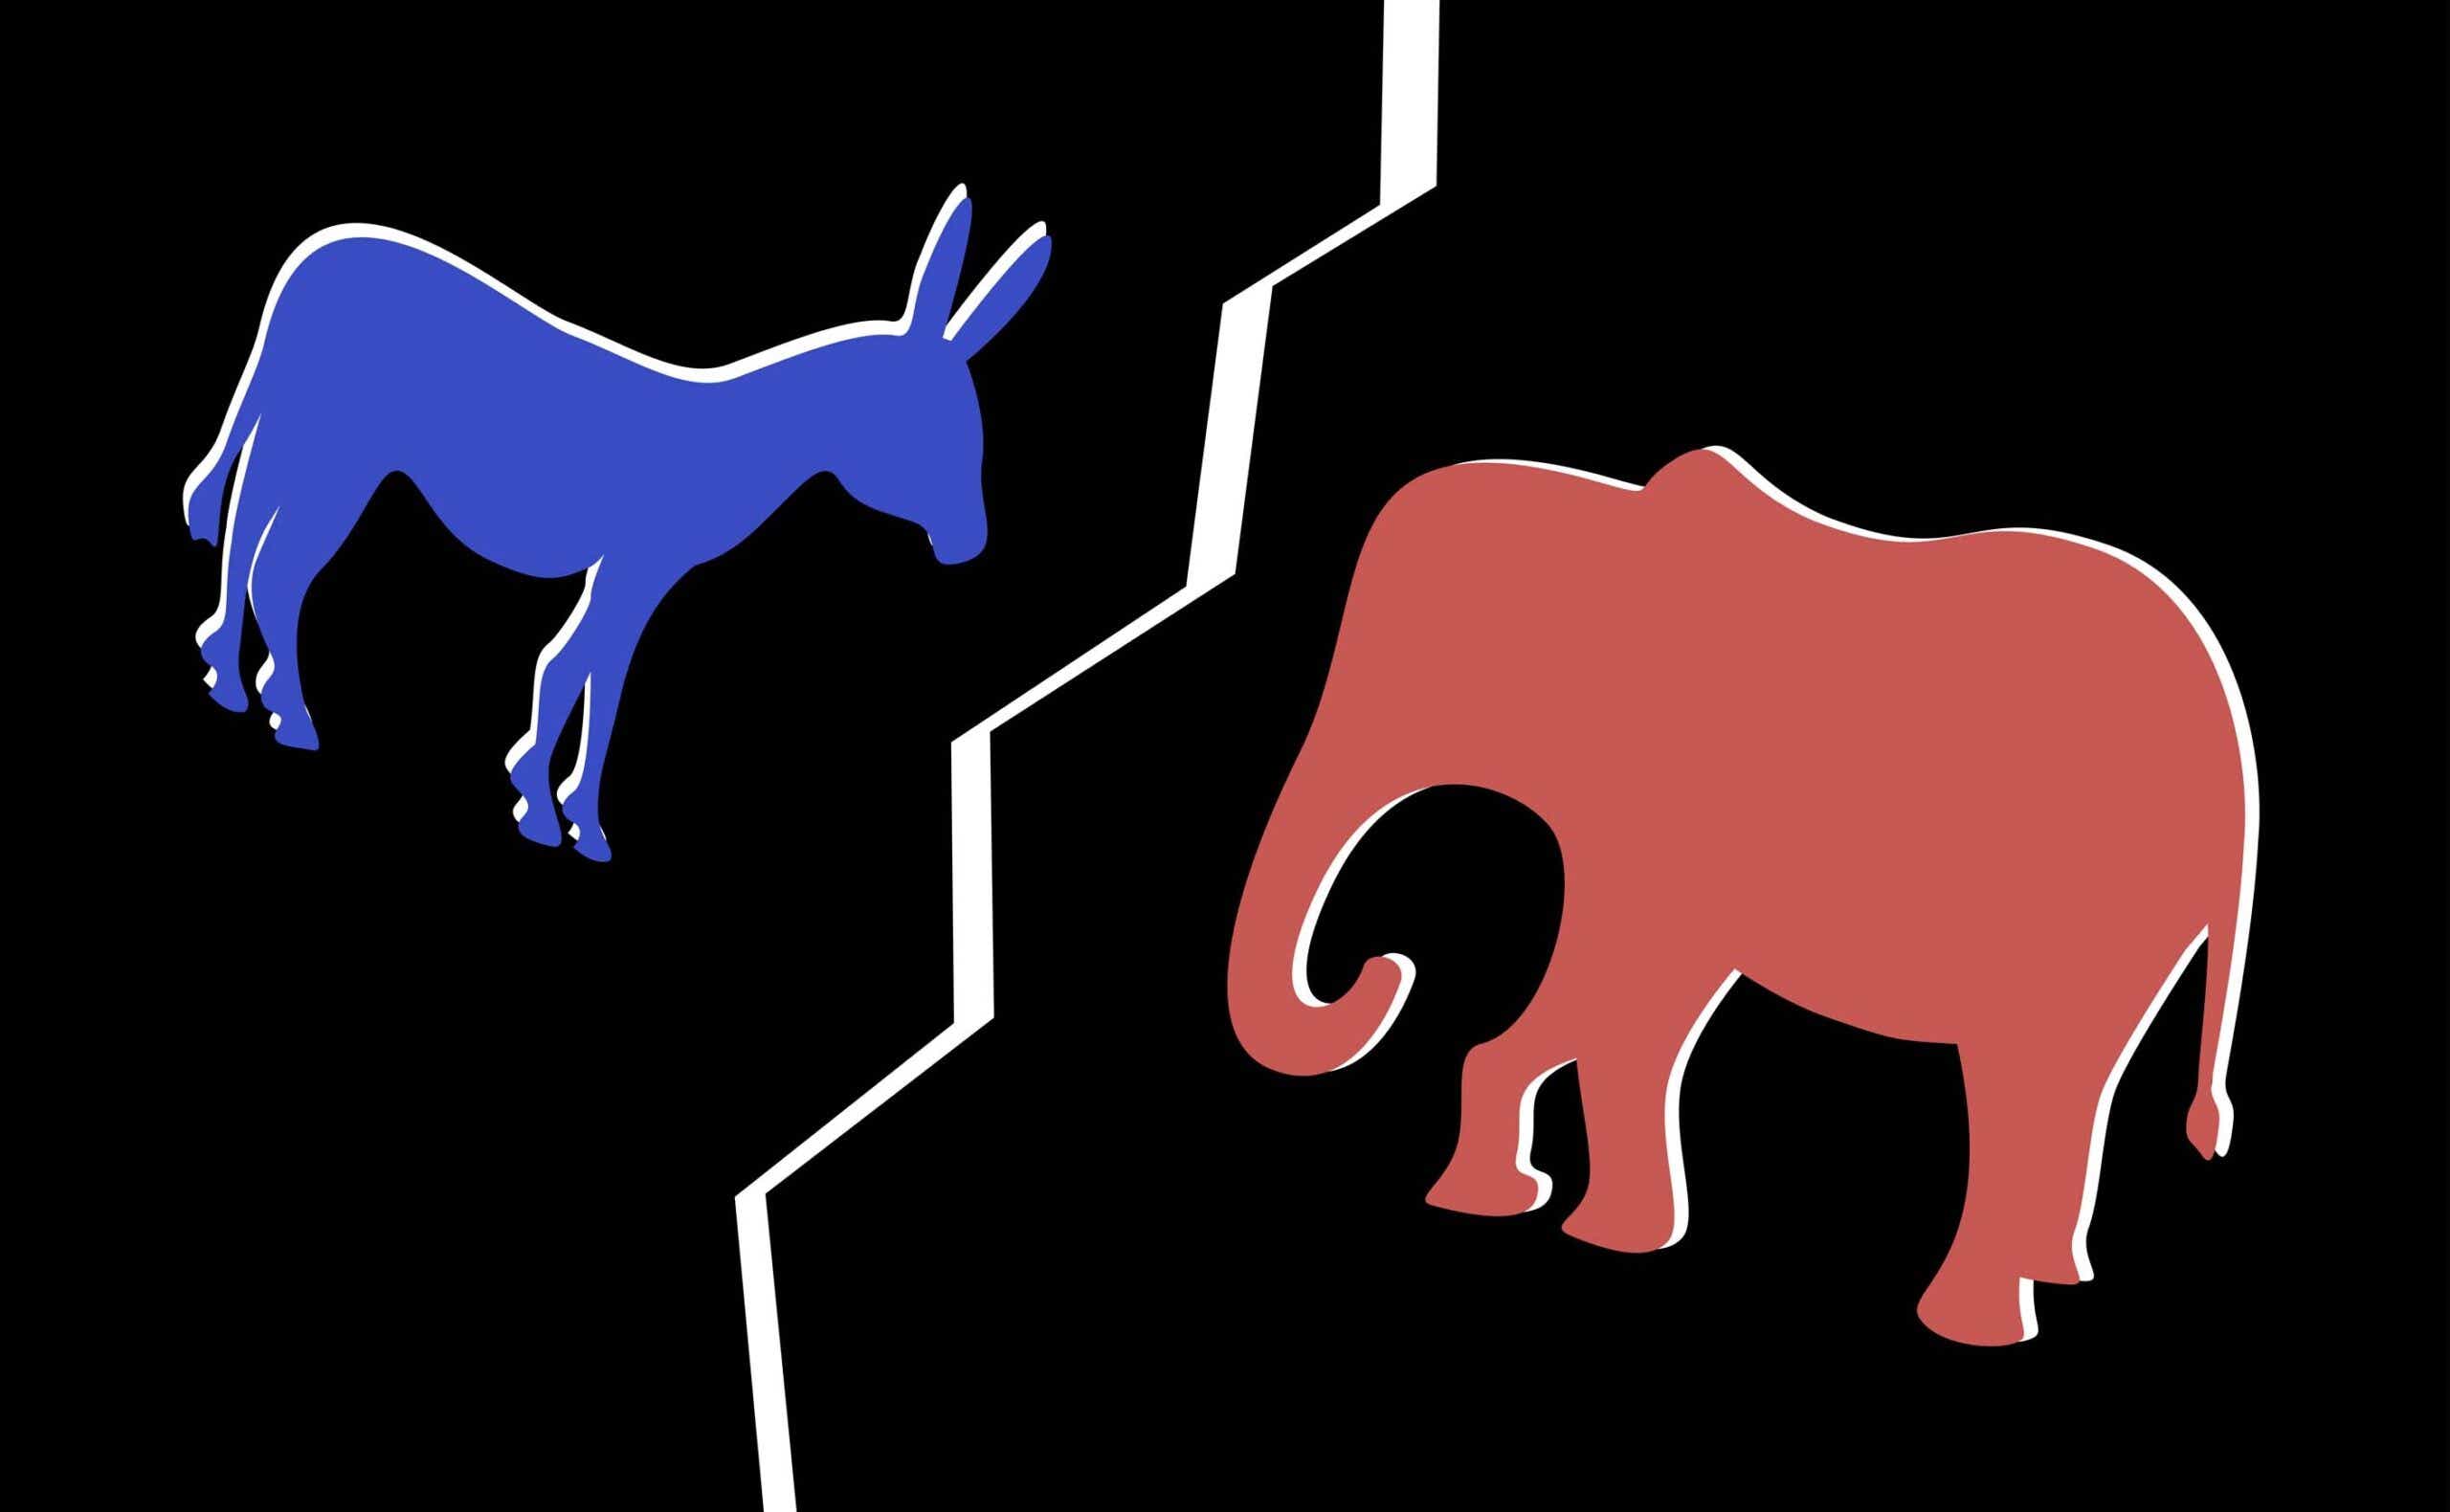 Illustration of a blue donkey and red elephant